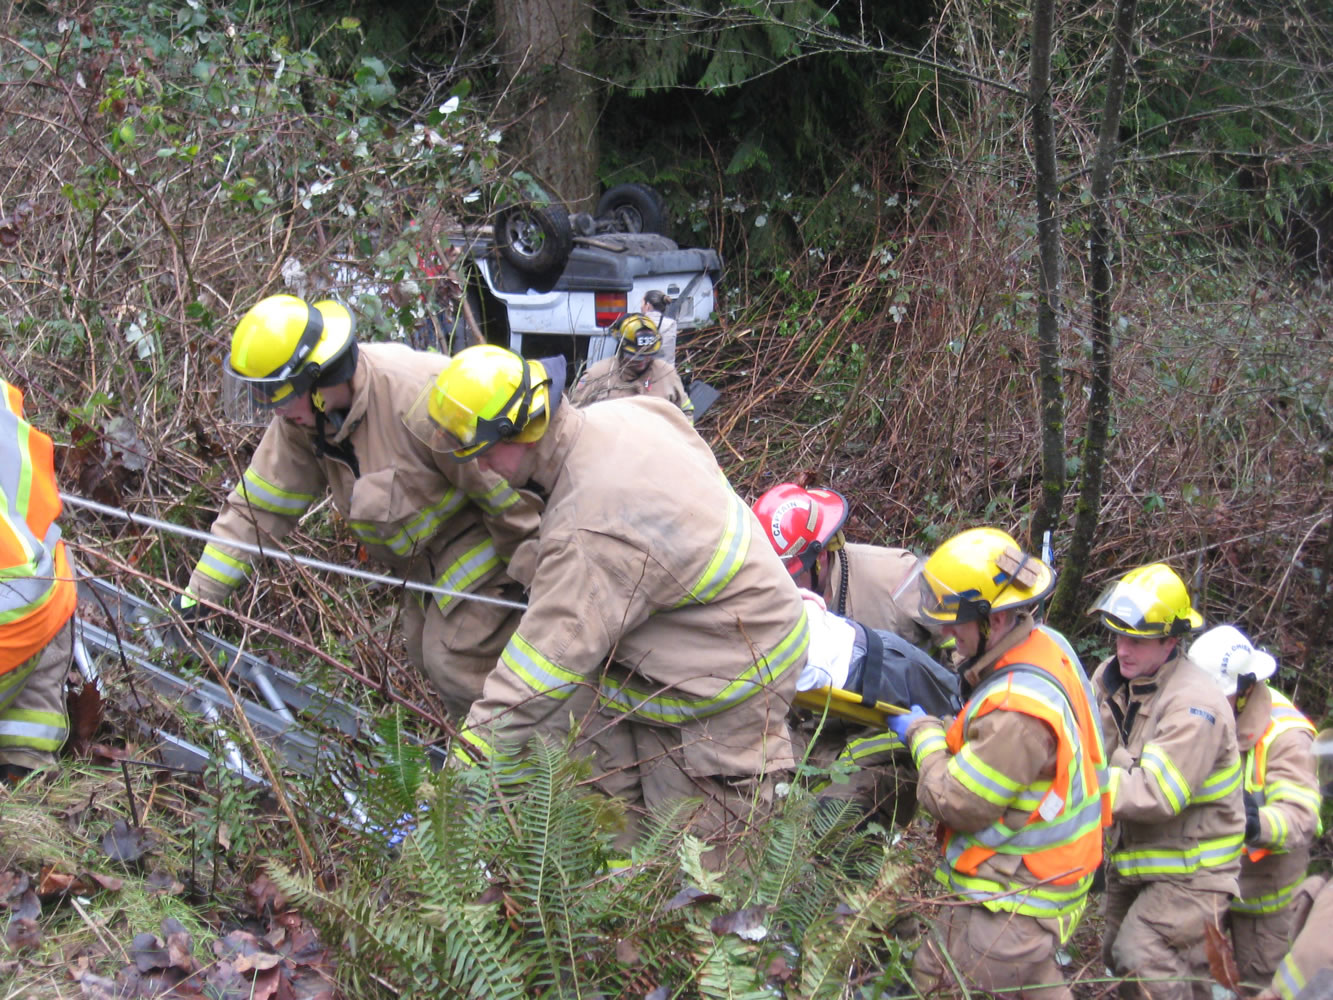 Firefighters rescue a 17-year-old girl who was injured when her vehicle left the roadway and landed upside-down in an embankment in Hockinson.